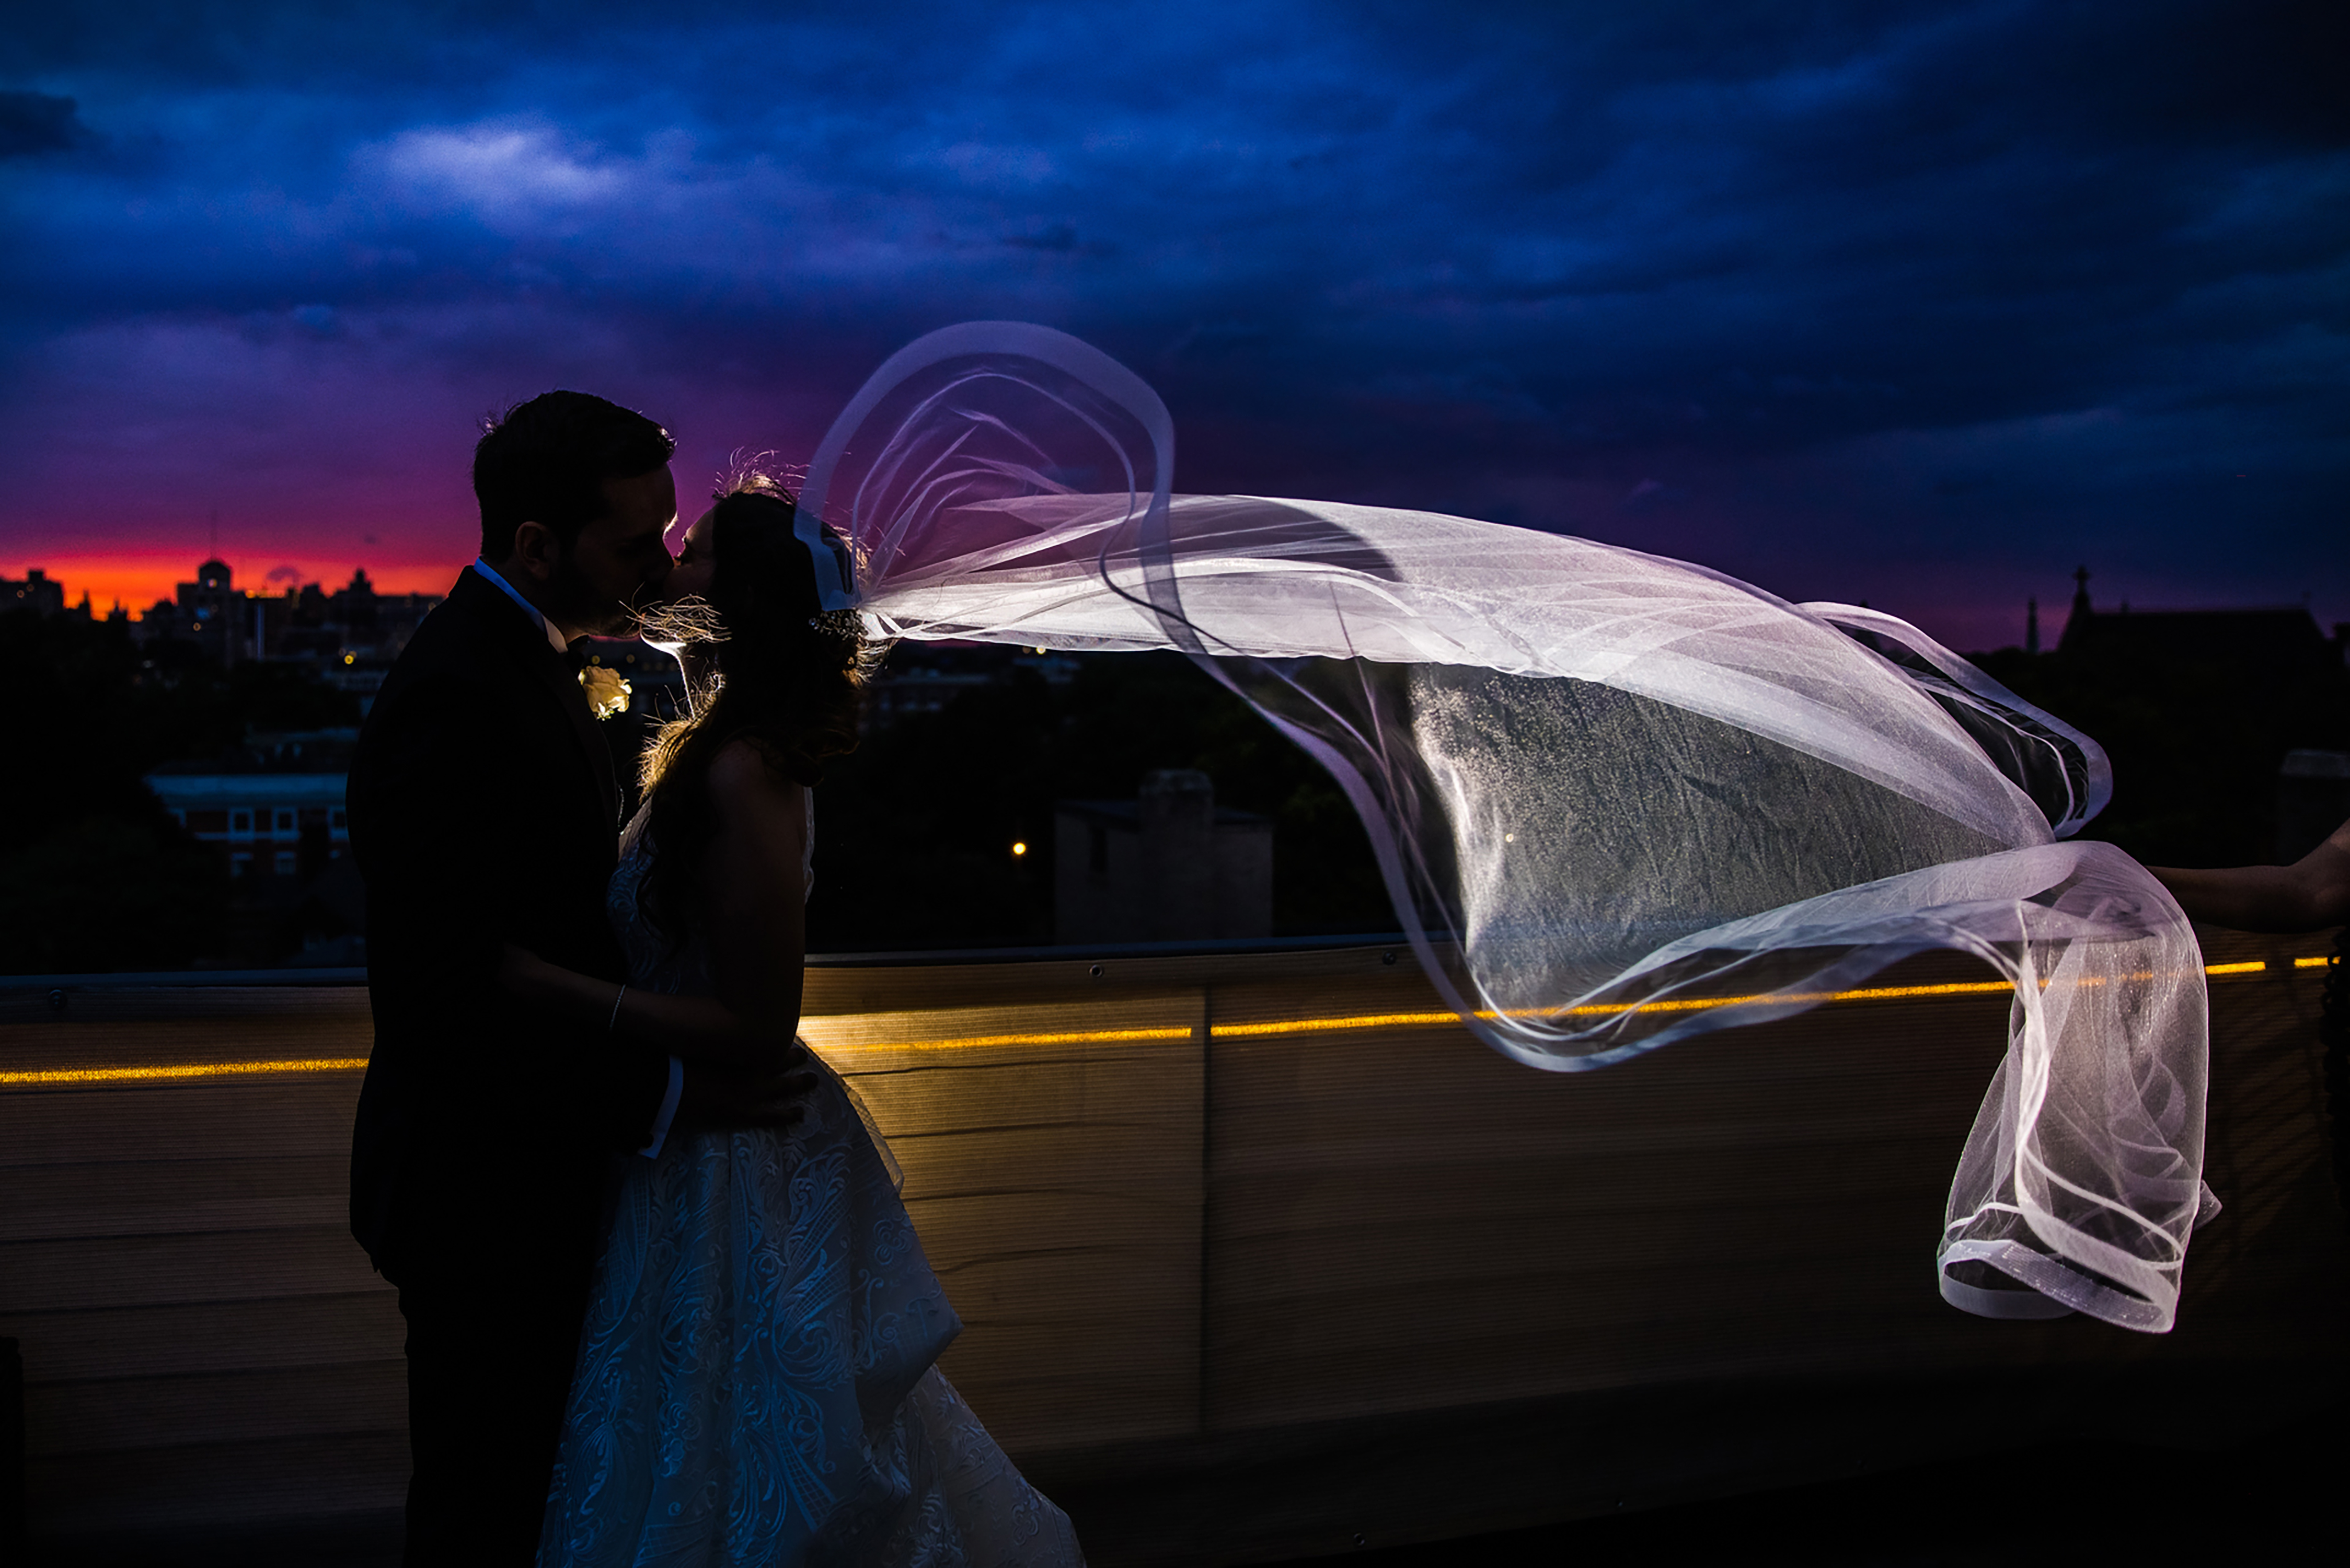 Wedding Couple Kissing on a Balcony at Night